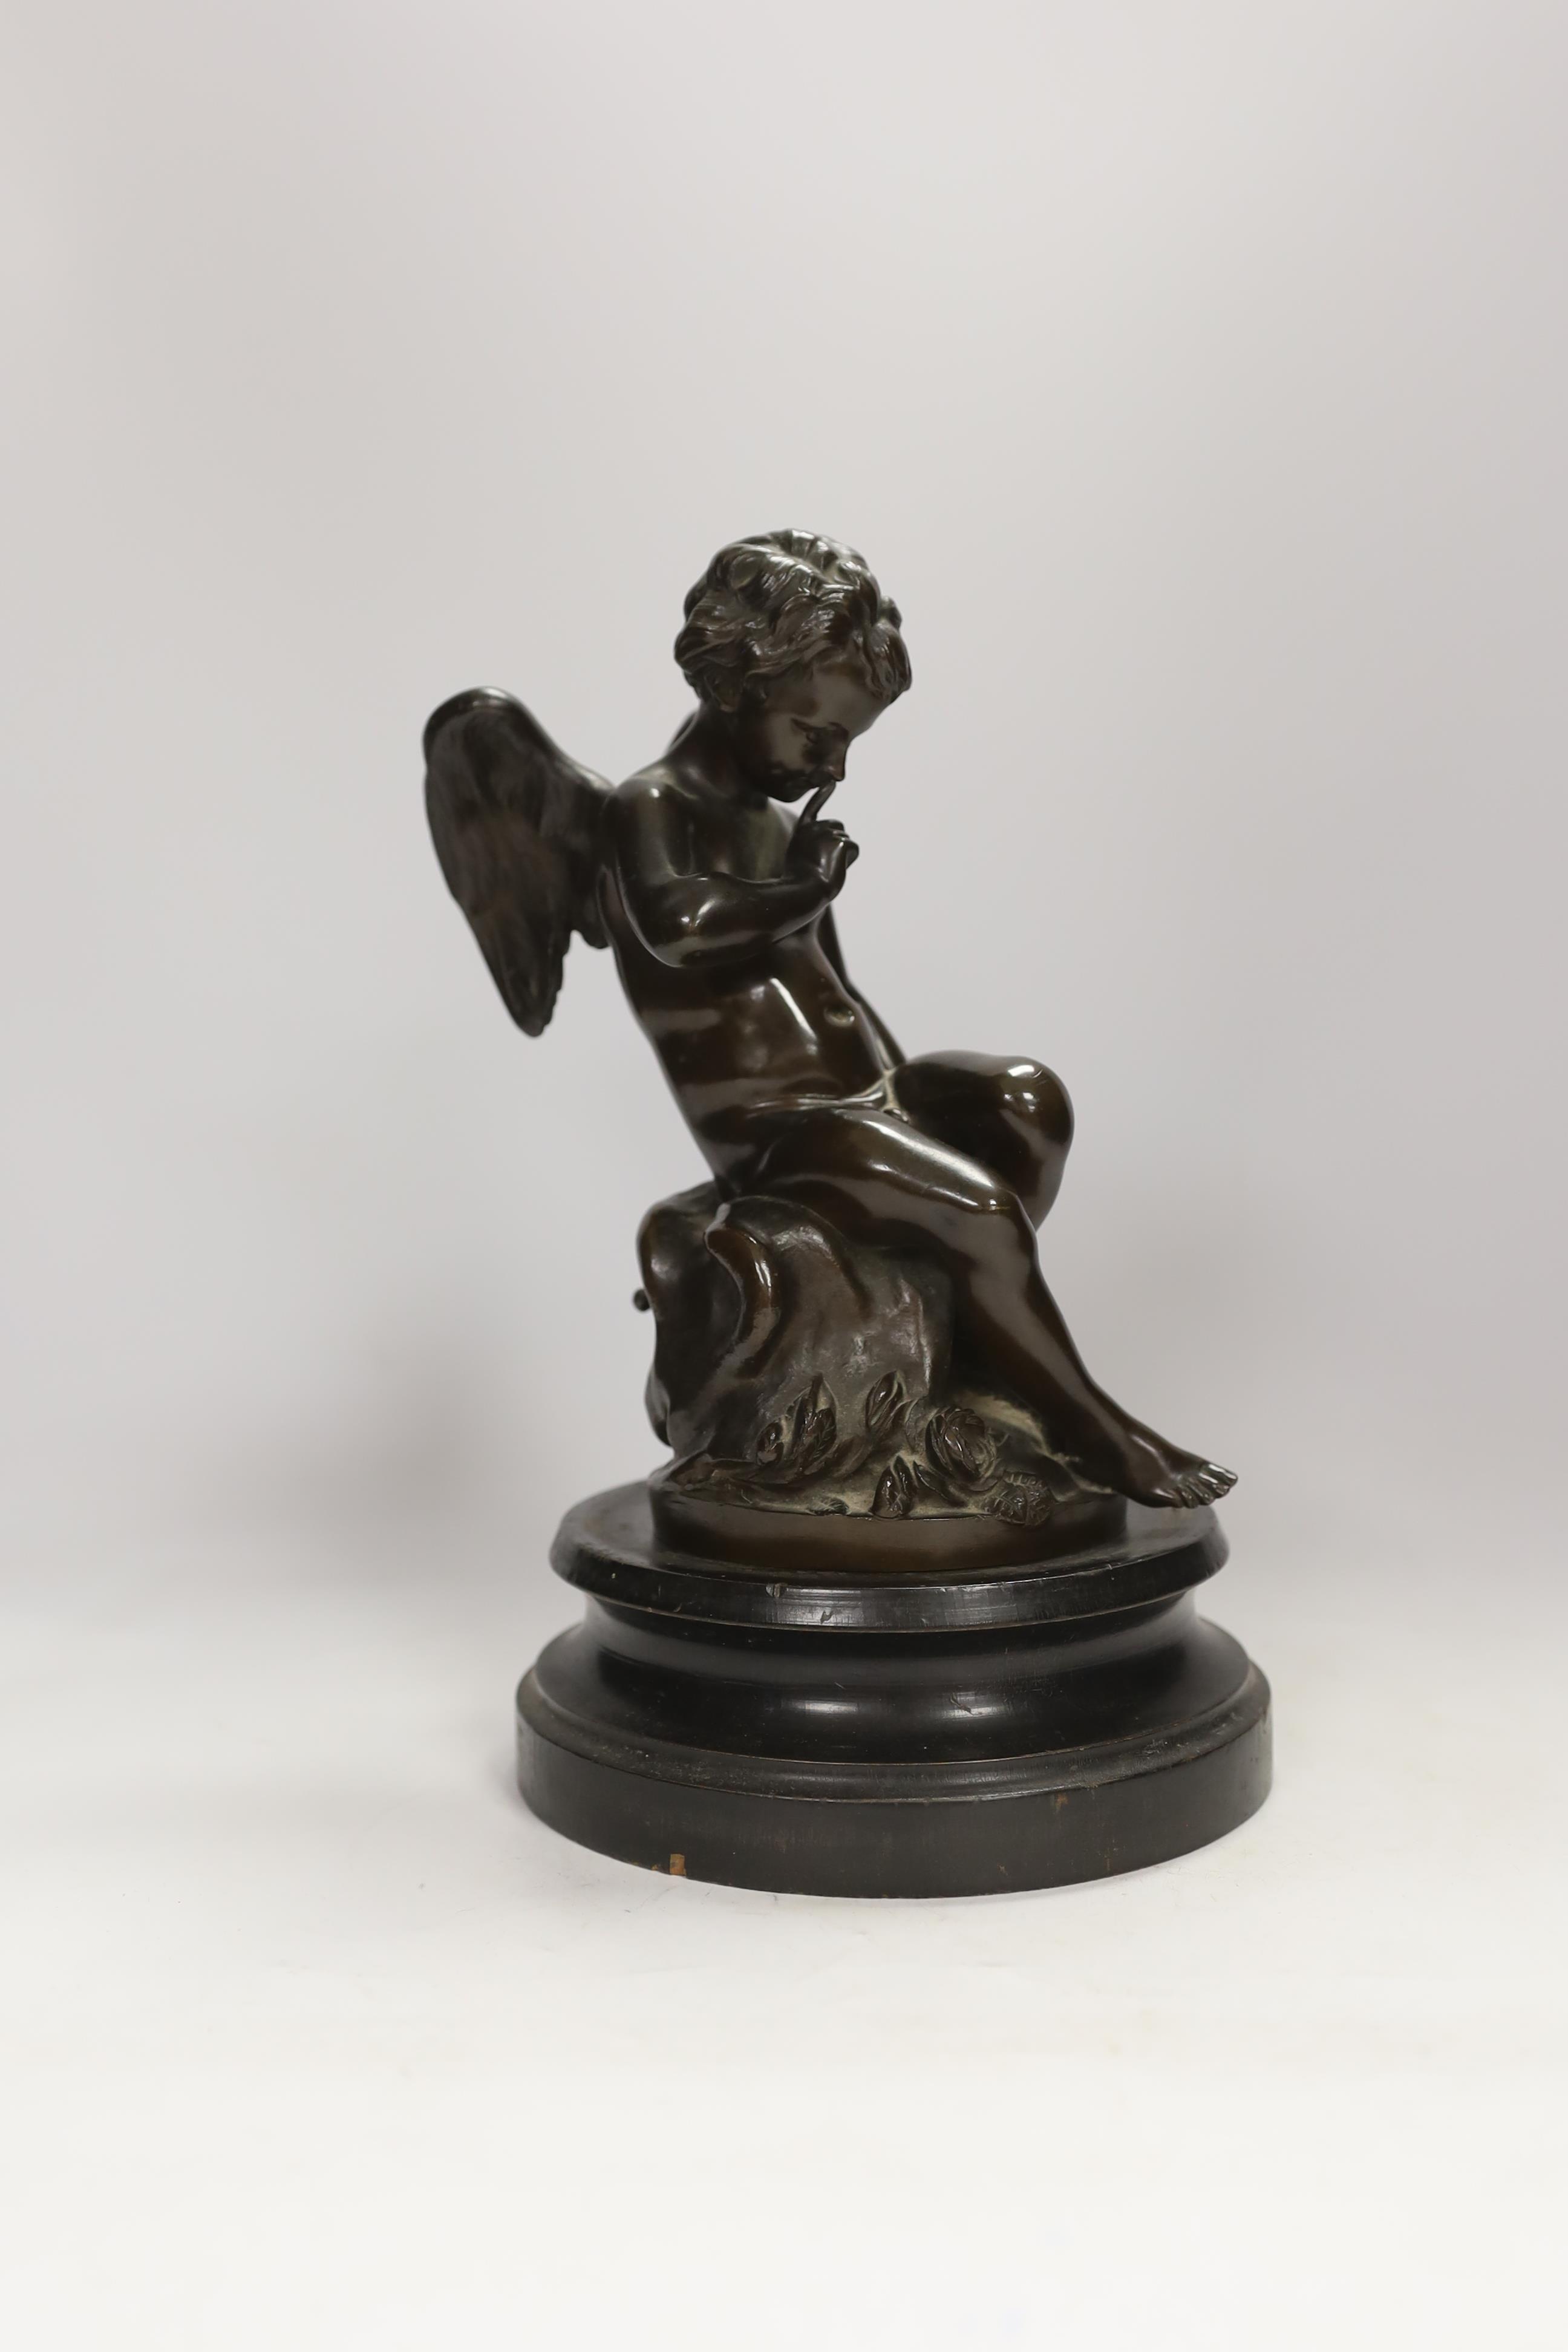 After Etienne Maurice Falconet (French, 1716-1791), a cast bronze of Cupid, ‘L’Amour Menacant, on hardwood stand, overall 28cm. Condition - good